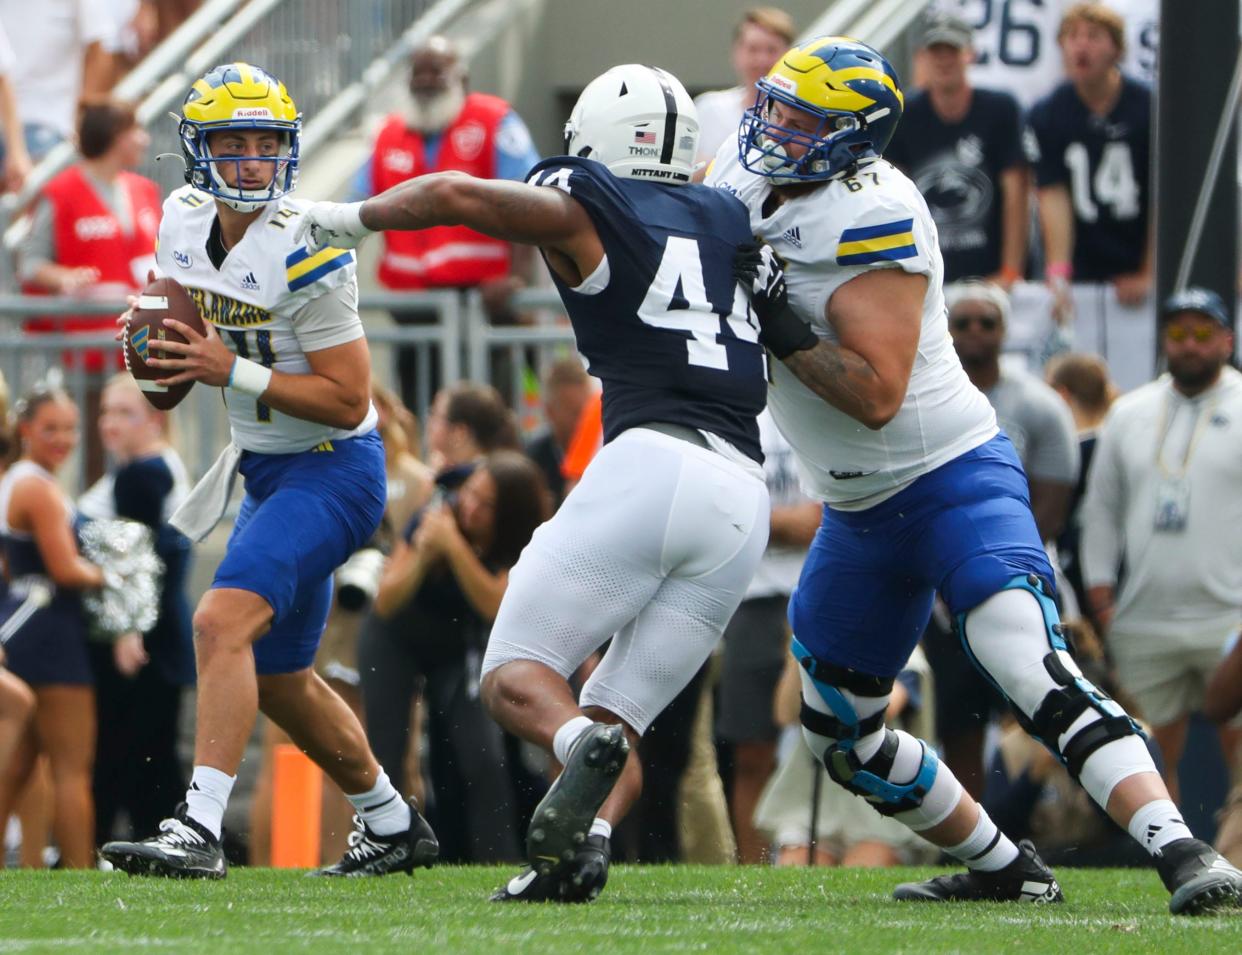 Penn State's Chop Robinson tries to get past Delaware offensive tackle Blaise Sparks and get to quarterback Ryan O'Connor during a game last September.